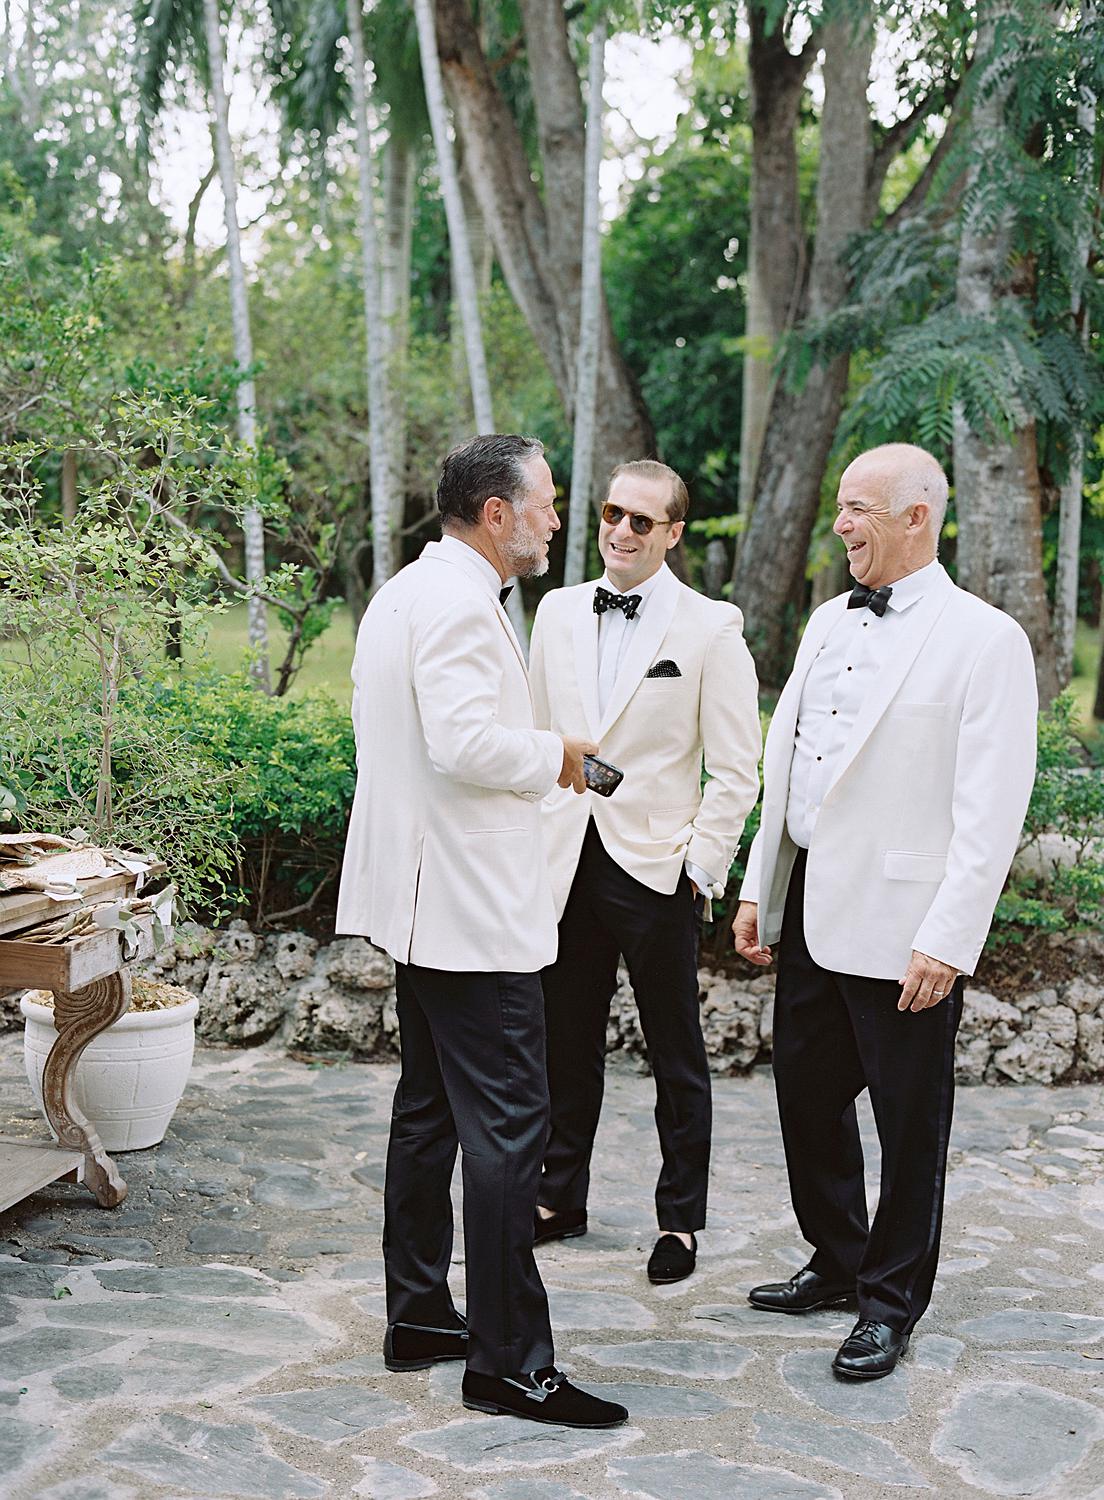 guests in white dinner jackets chatting before the Altos de Chavón wedding.